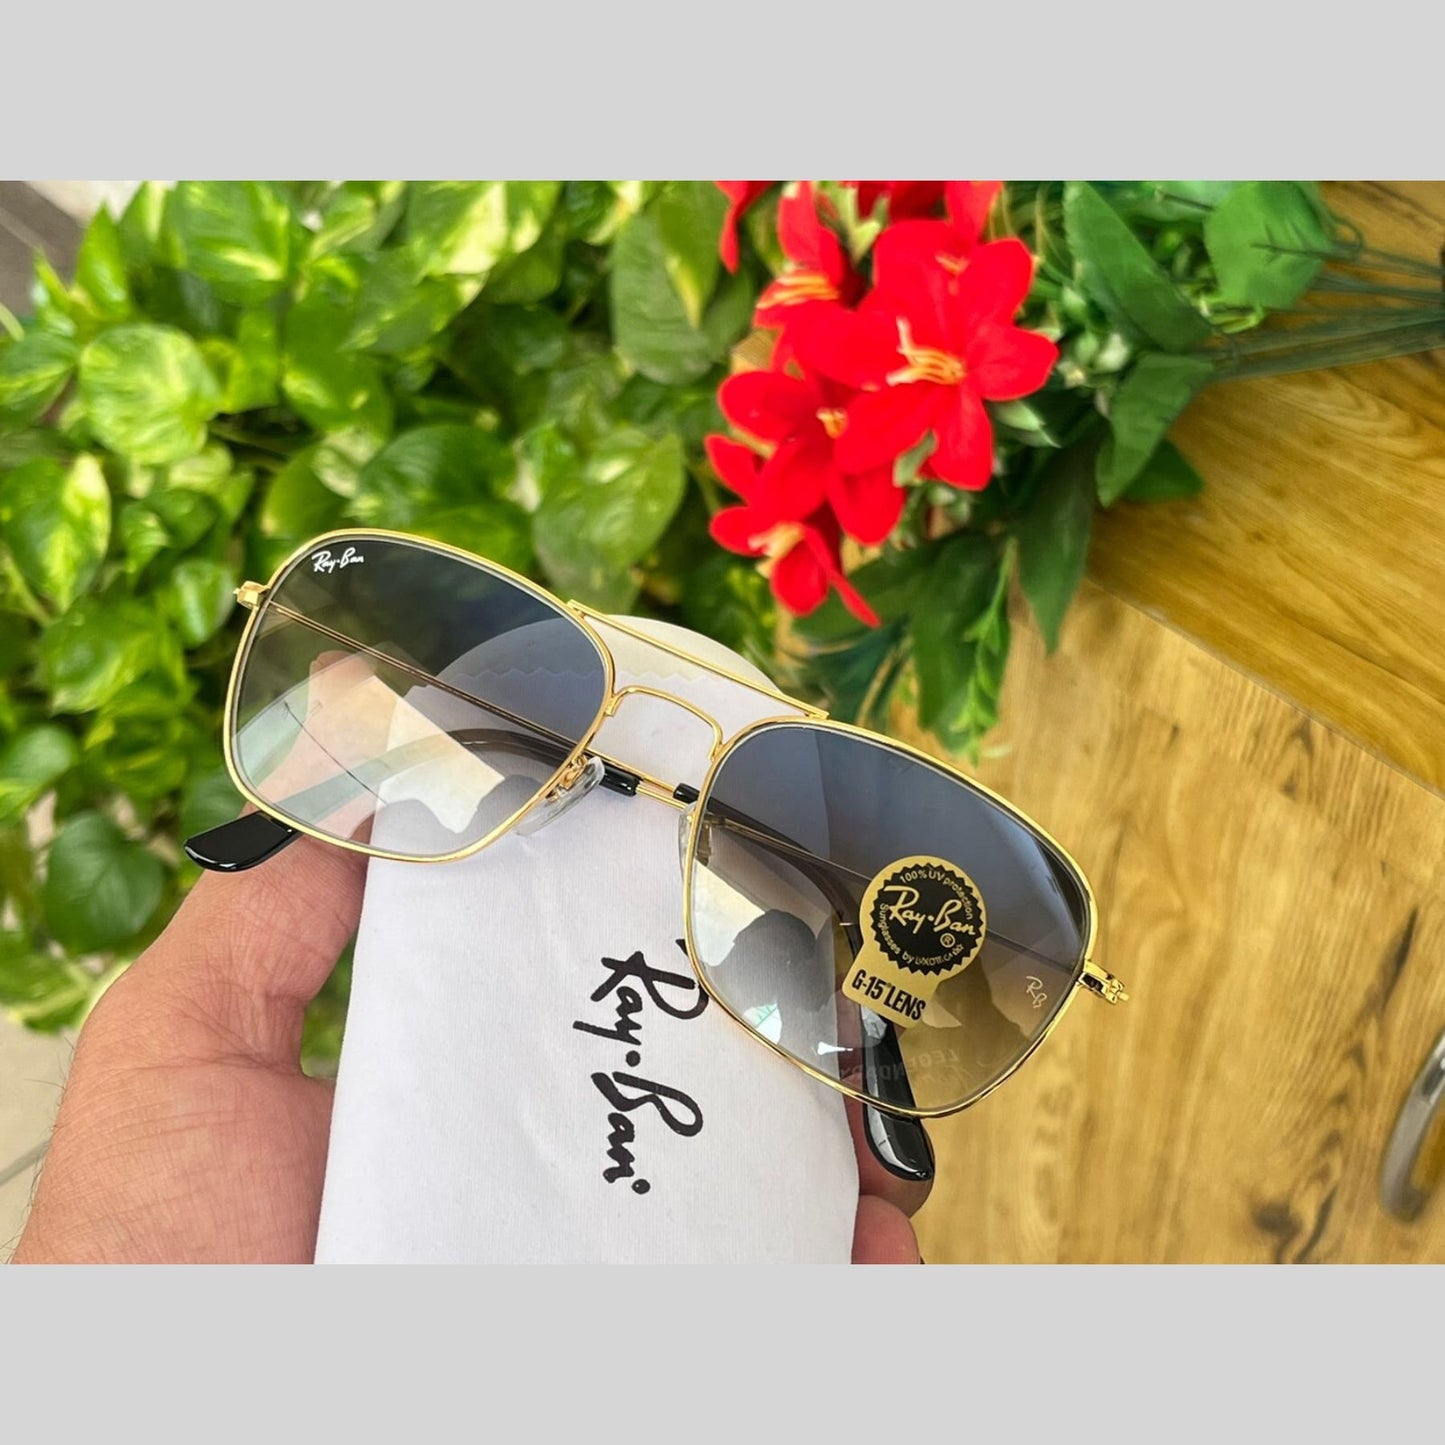 RAY-BAN New Attractive Blue Shaded & Gold 3136 Square Aviator Style Sunglass For Unisex